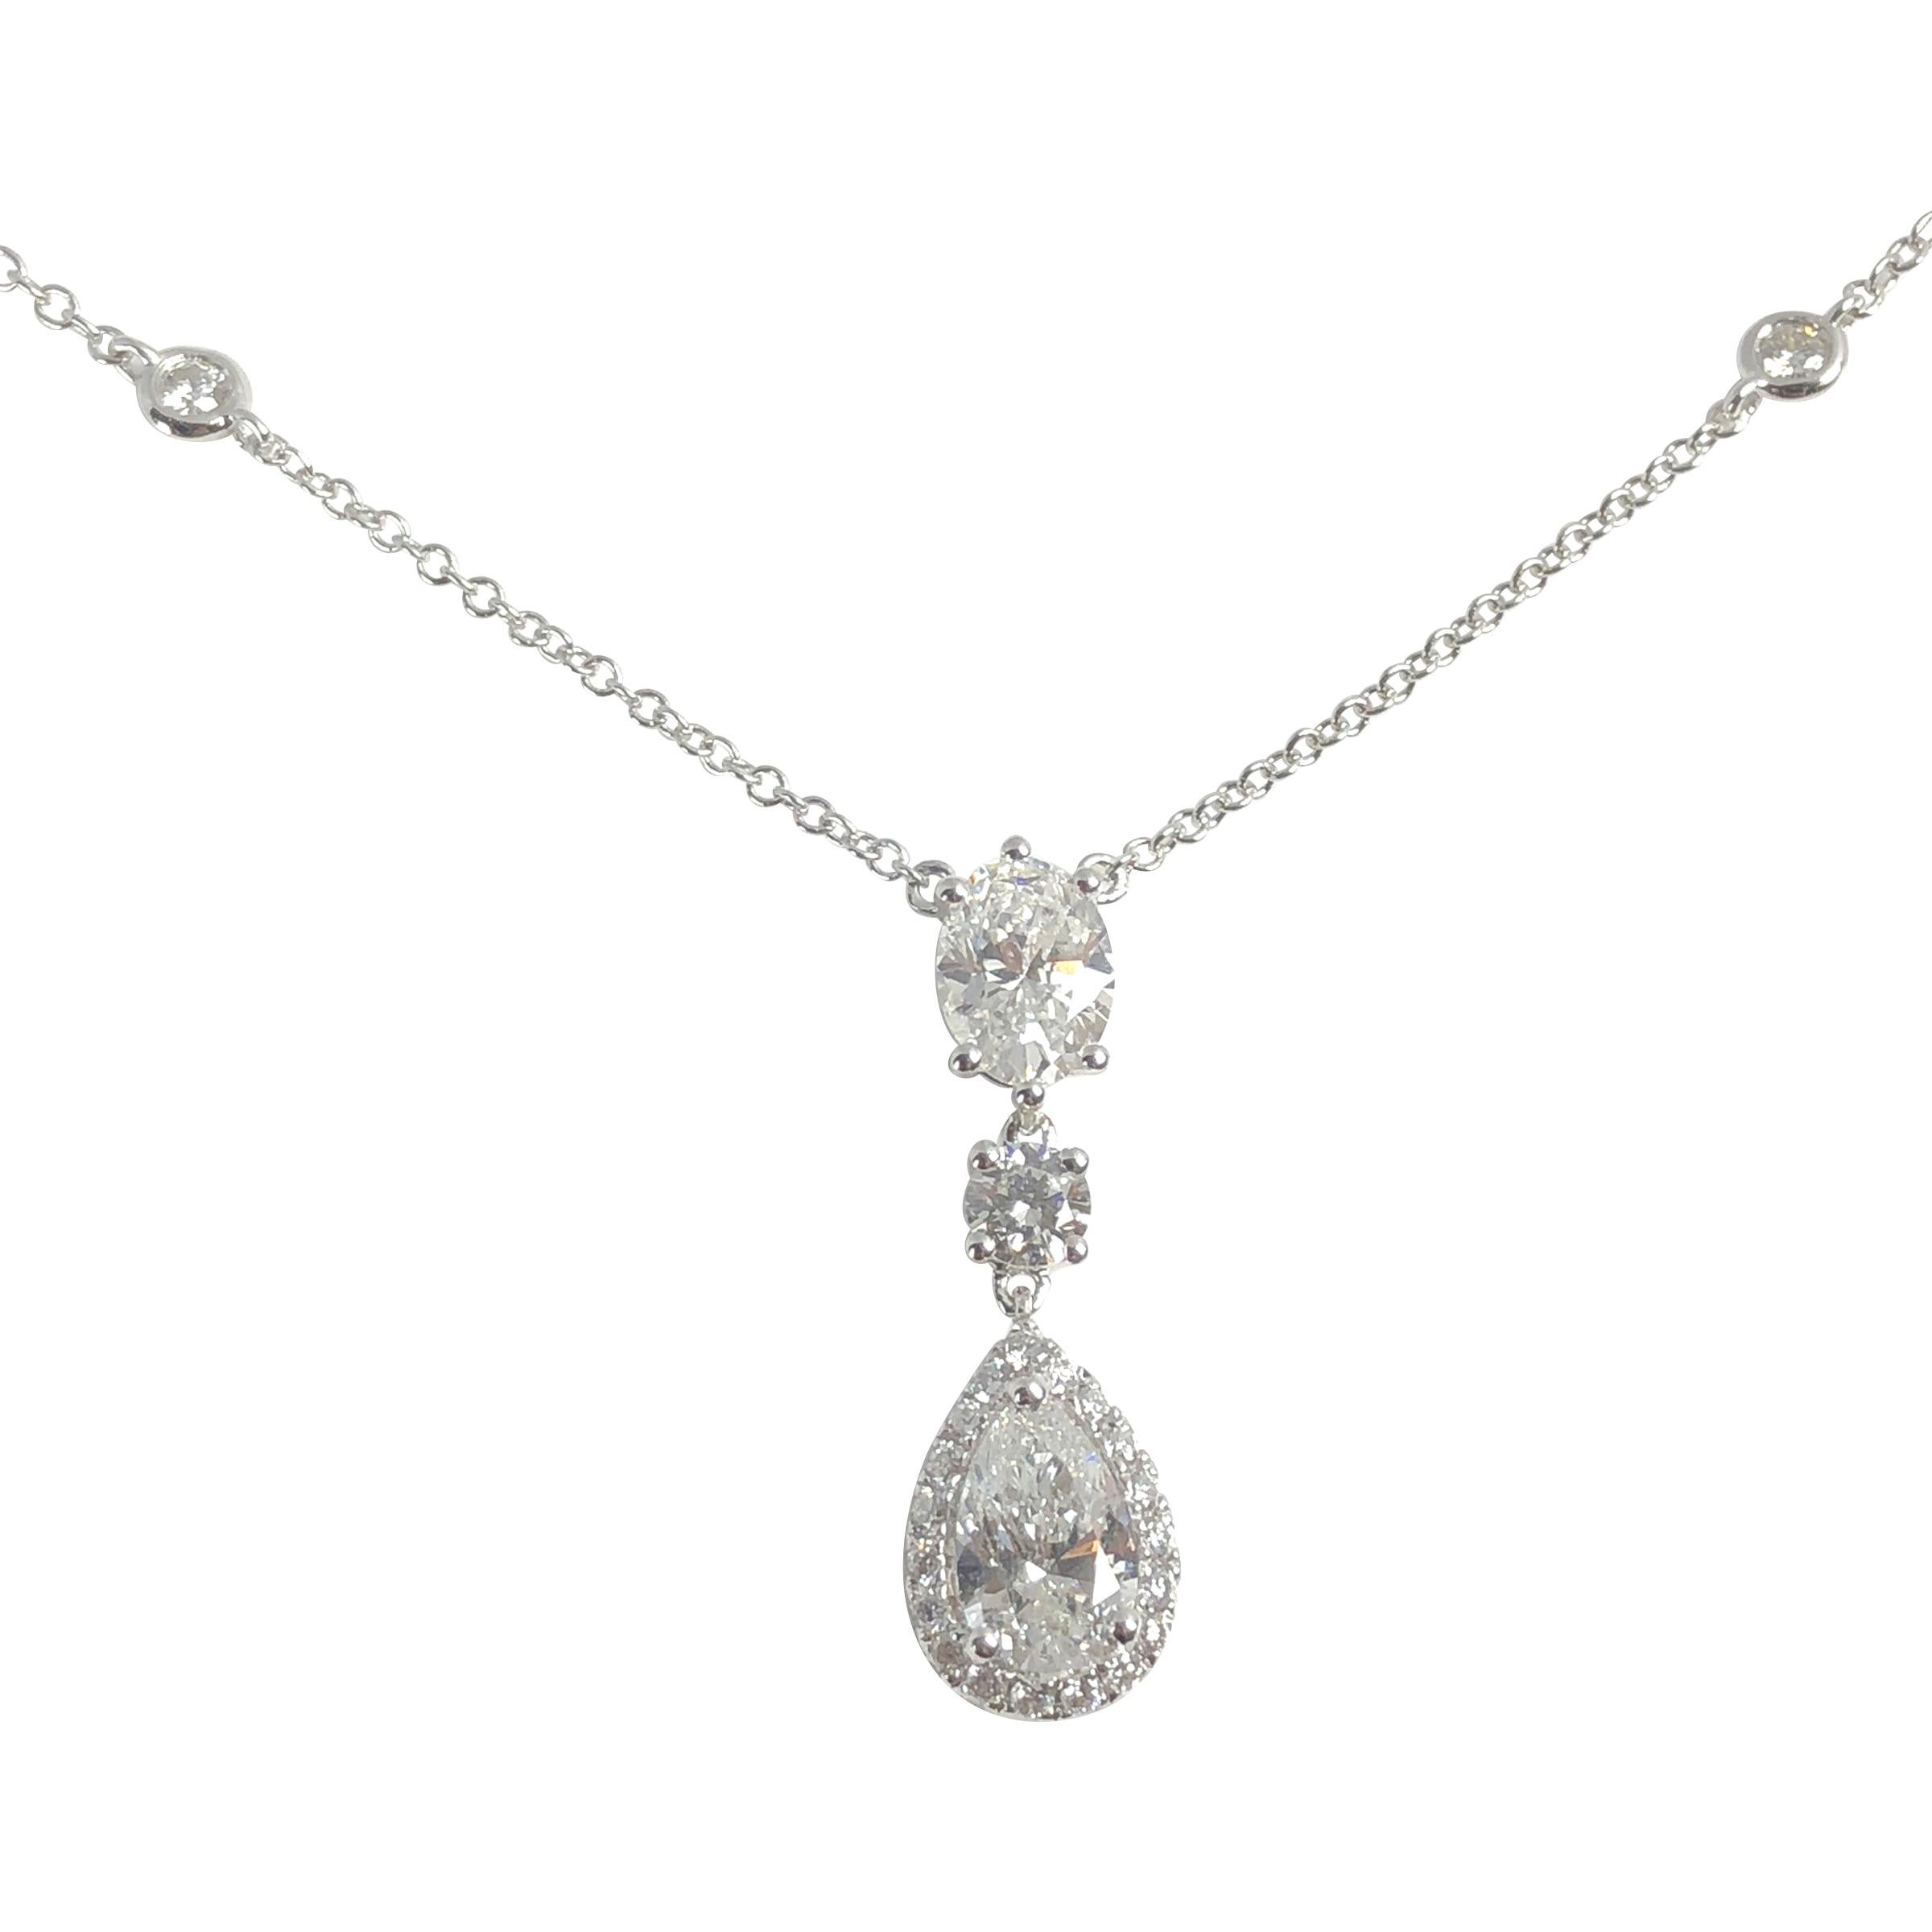 This pendant features a stunning three-tier design, showcasing a meticulously selected combination of diamond shapes. An Oval cut, a Round diamond, and a Pear Shape diamond are expertly arranged, creating a harmonious blend of shapes that draw the